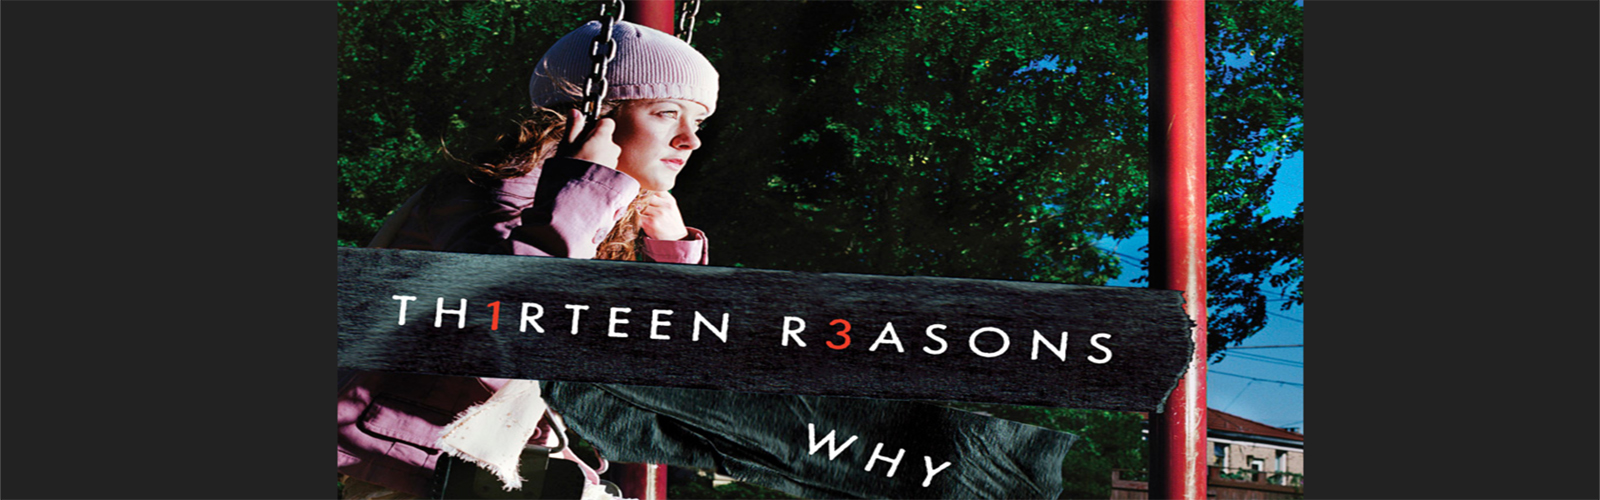 Is ’13 reasons why’ highlighting a suicidal message?